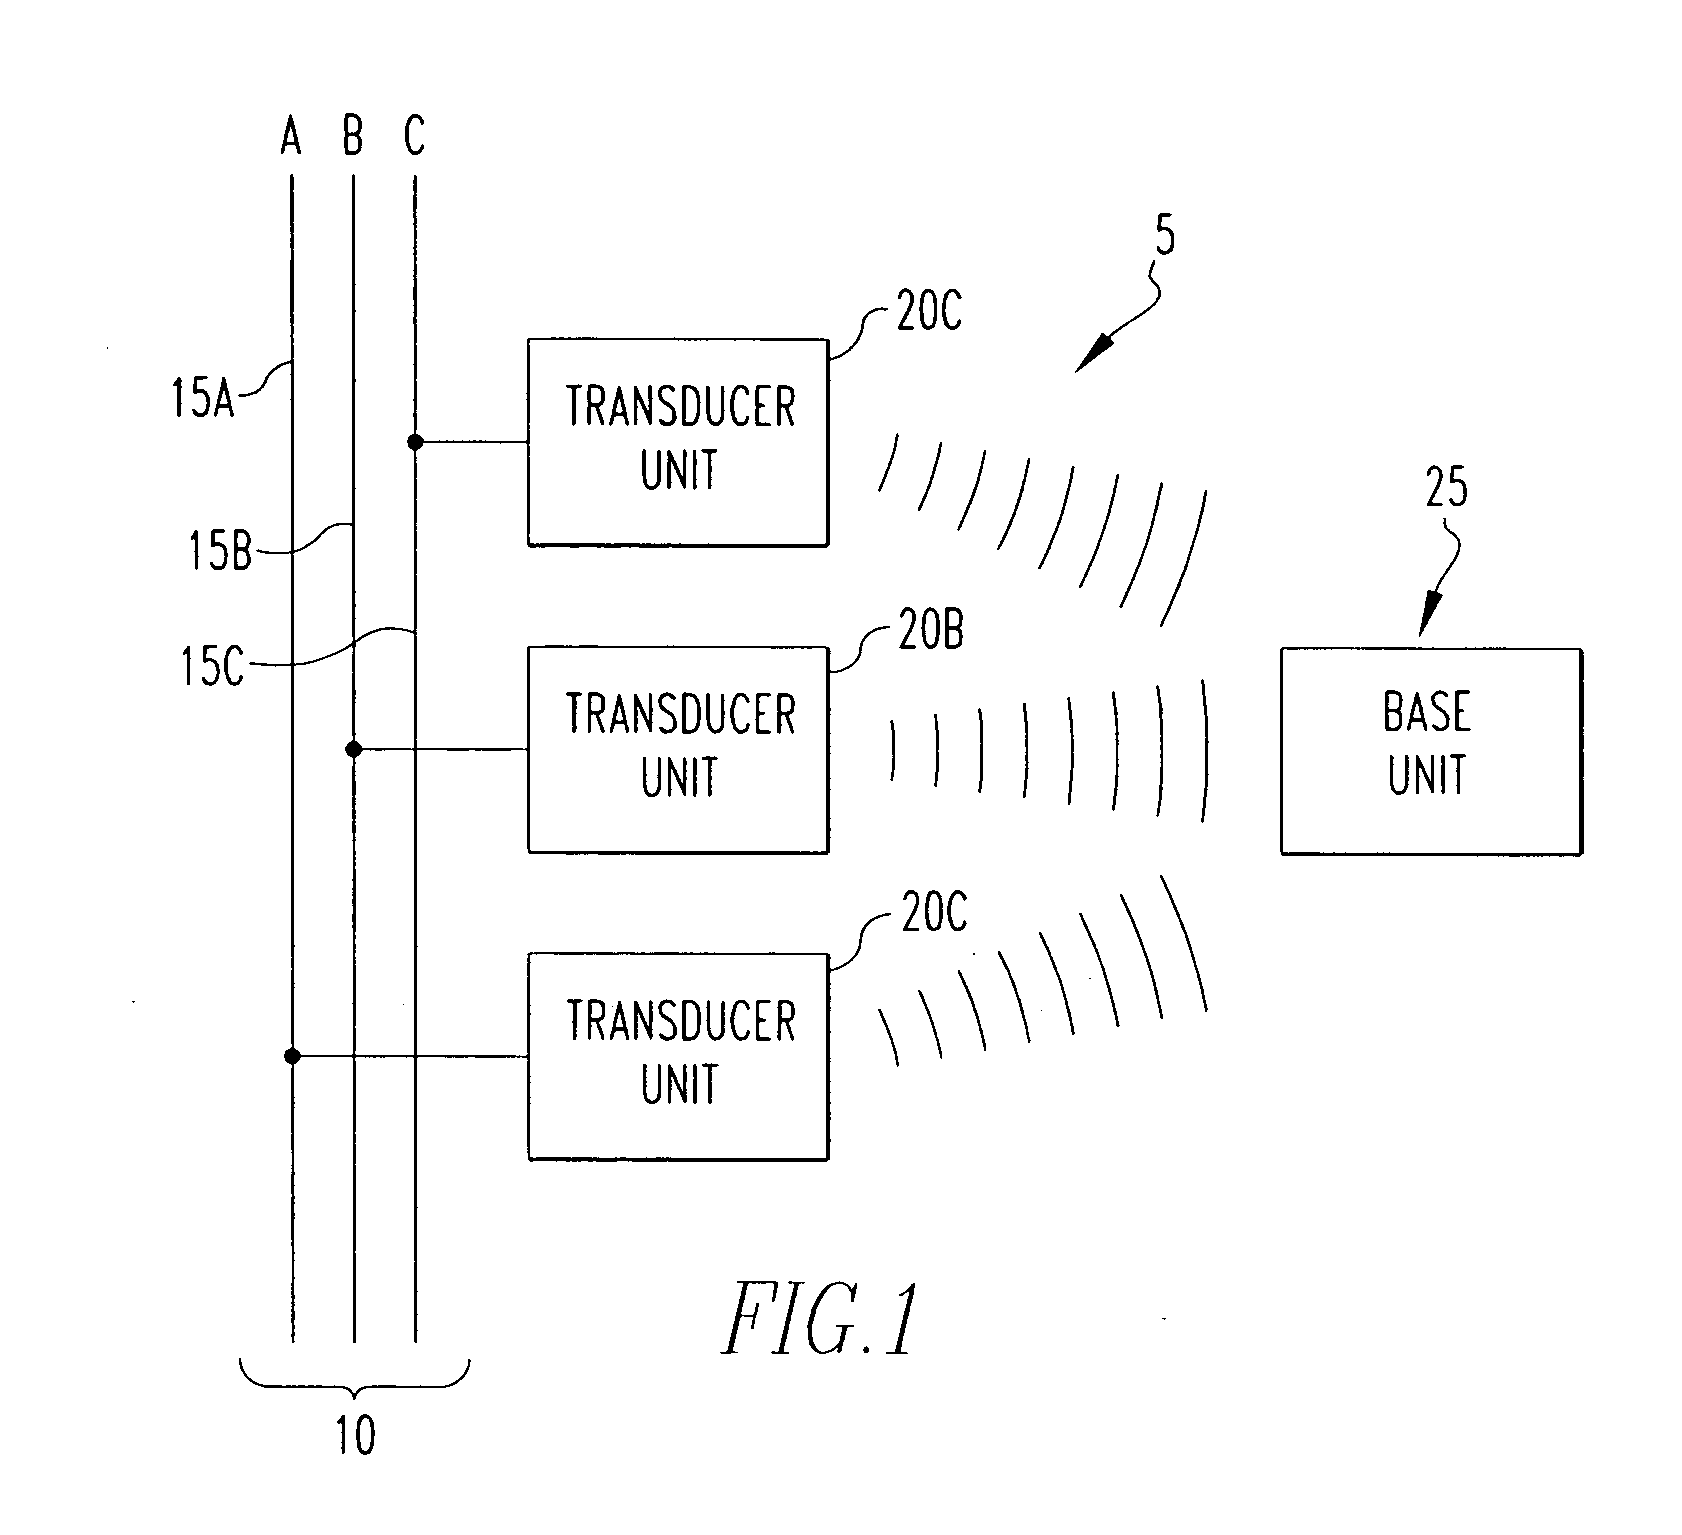 Power monitoring system including a wirelessly communicating electrical power transducer